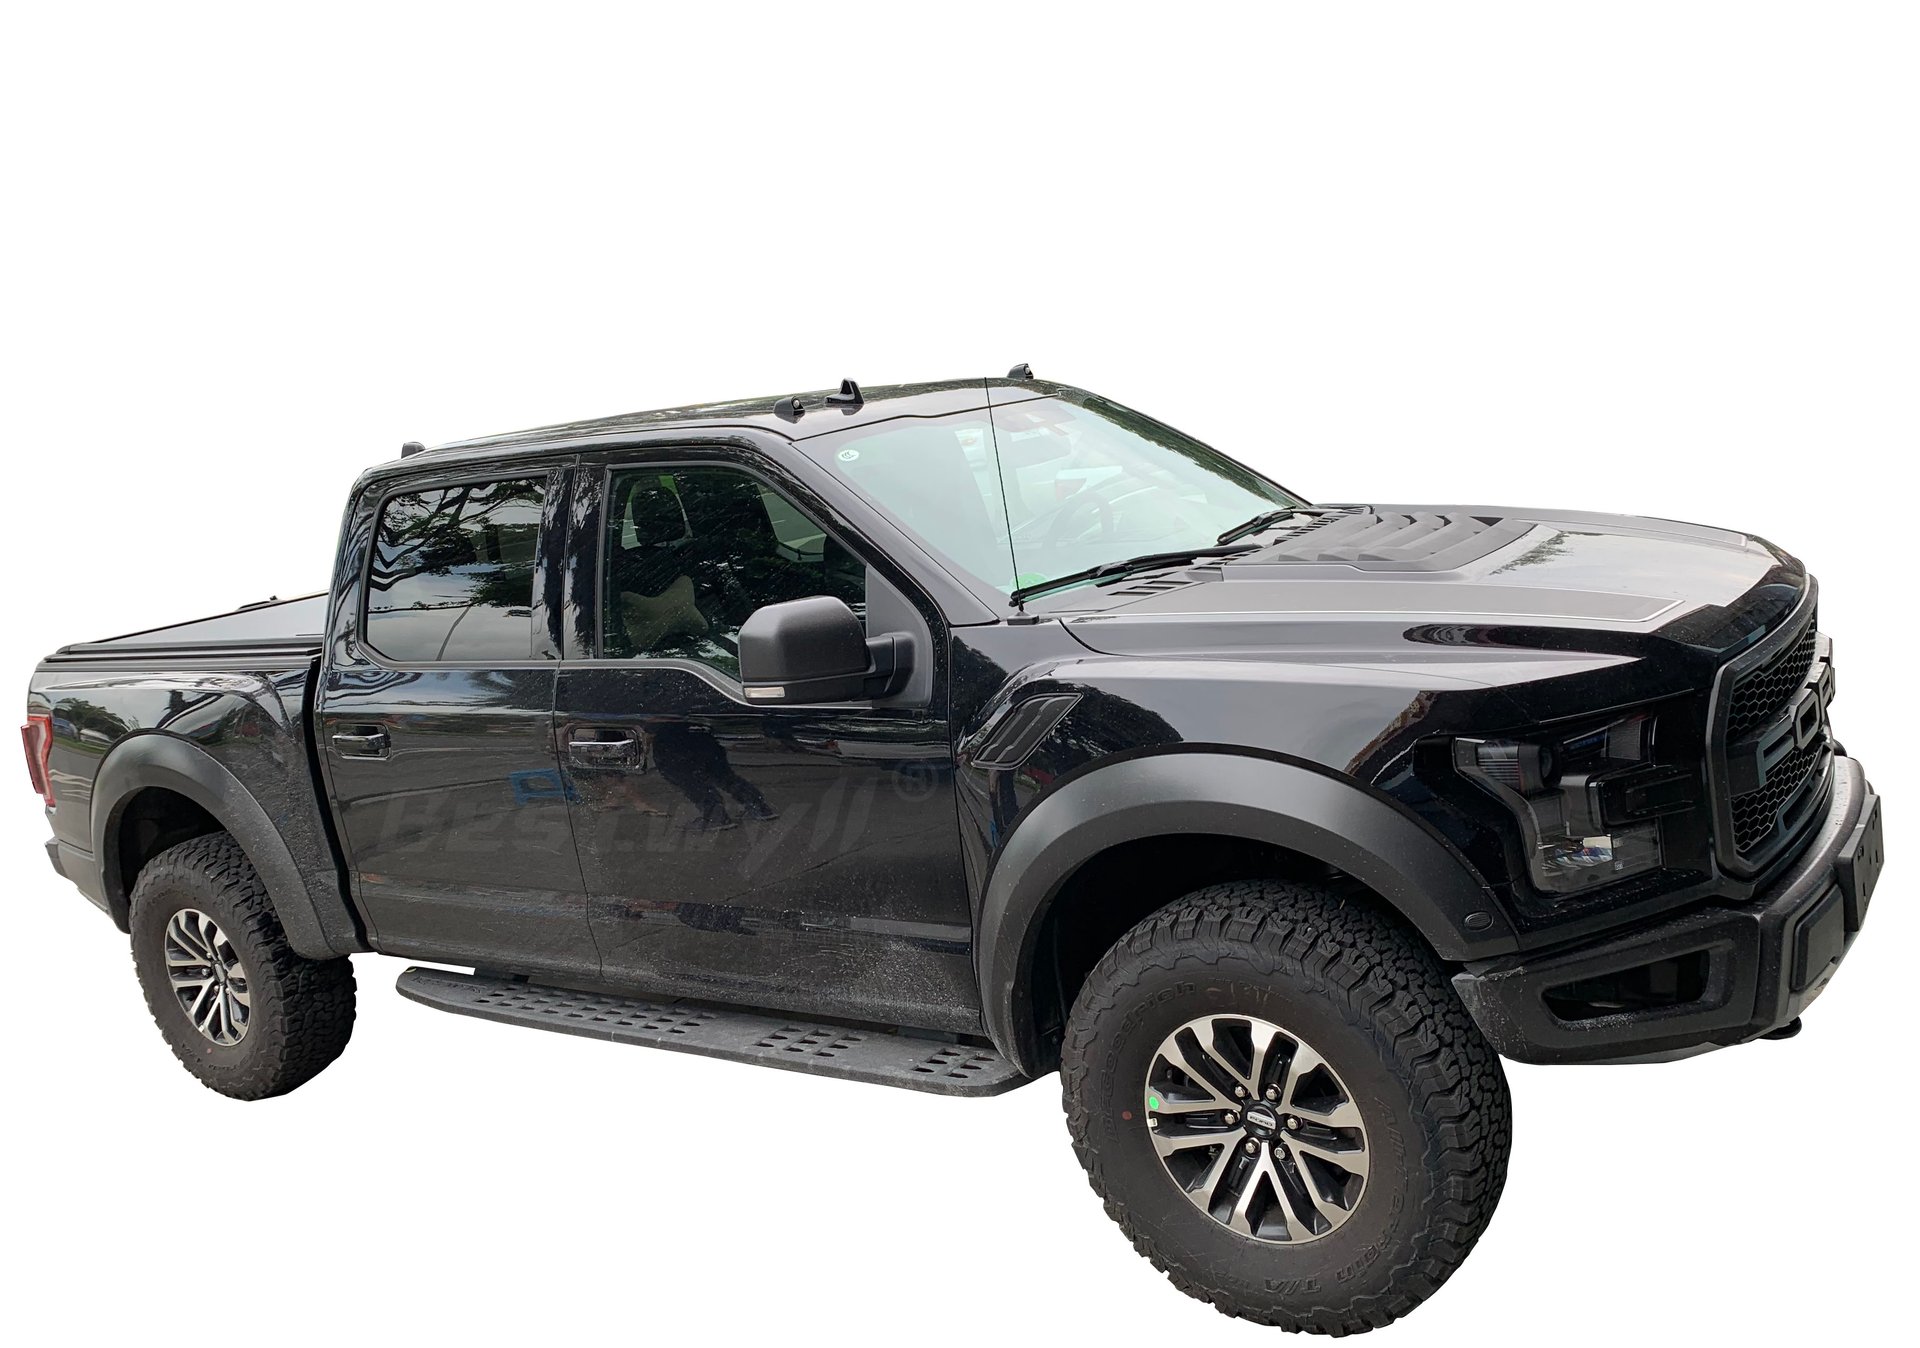 Manual Truck Bed Cover For Ford F150 Raptor K22